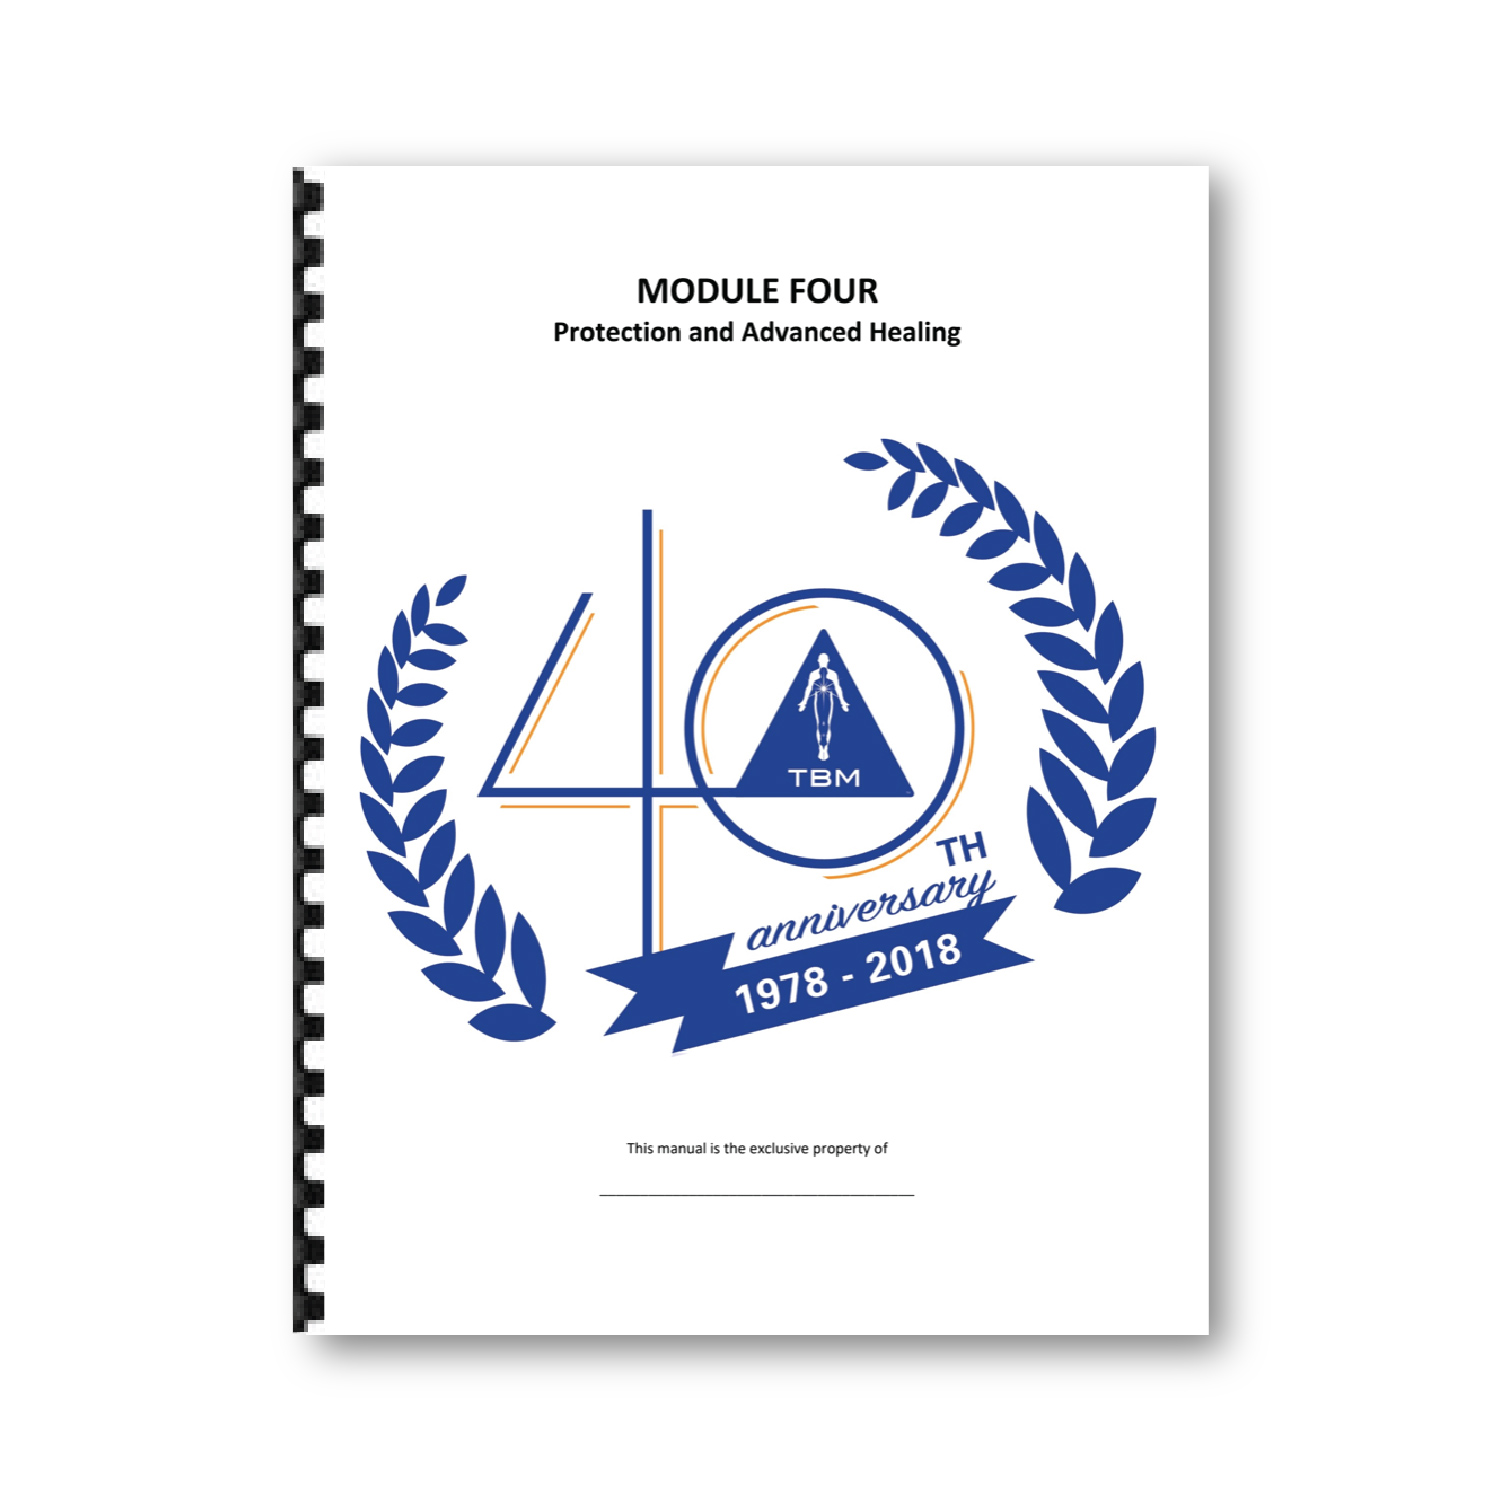 PB1&2 (Mod 4) Manual: 40th Anniversary Edition *REGISTRATION ADD-ON ONLY*